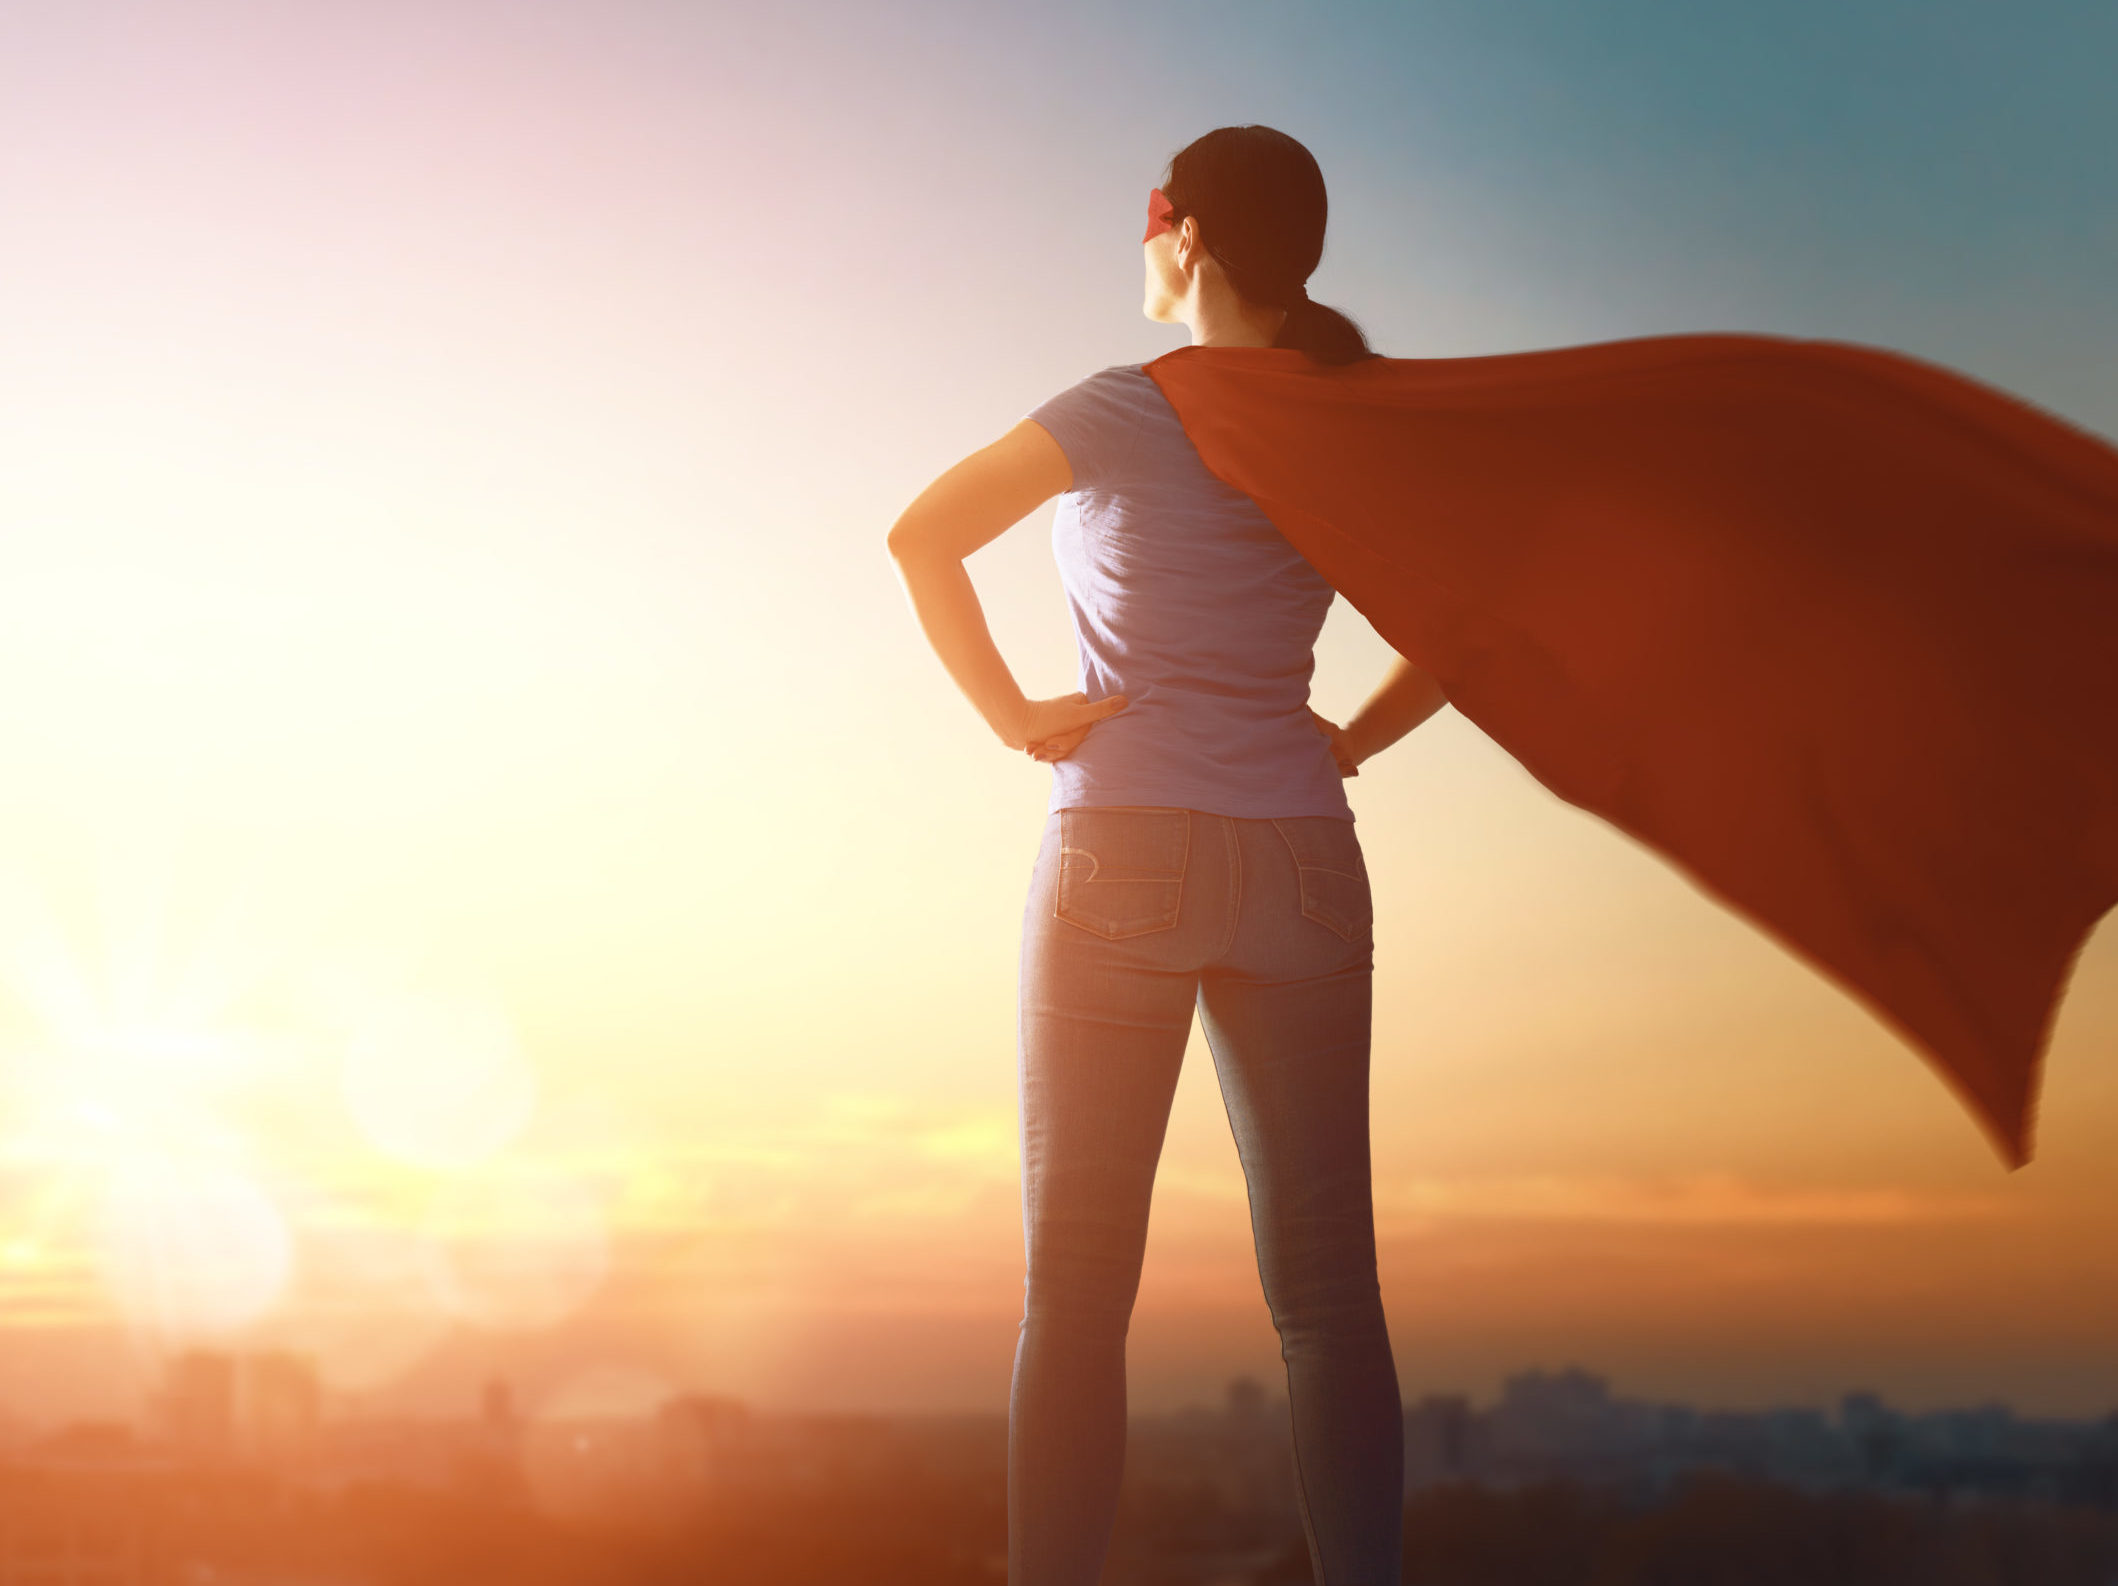 What’s Your (CEO) Superpower?